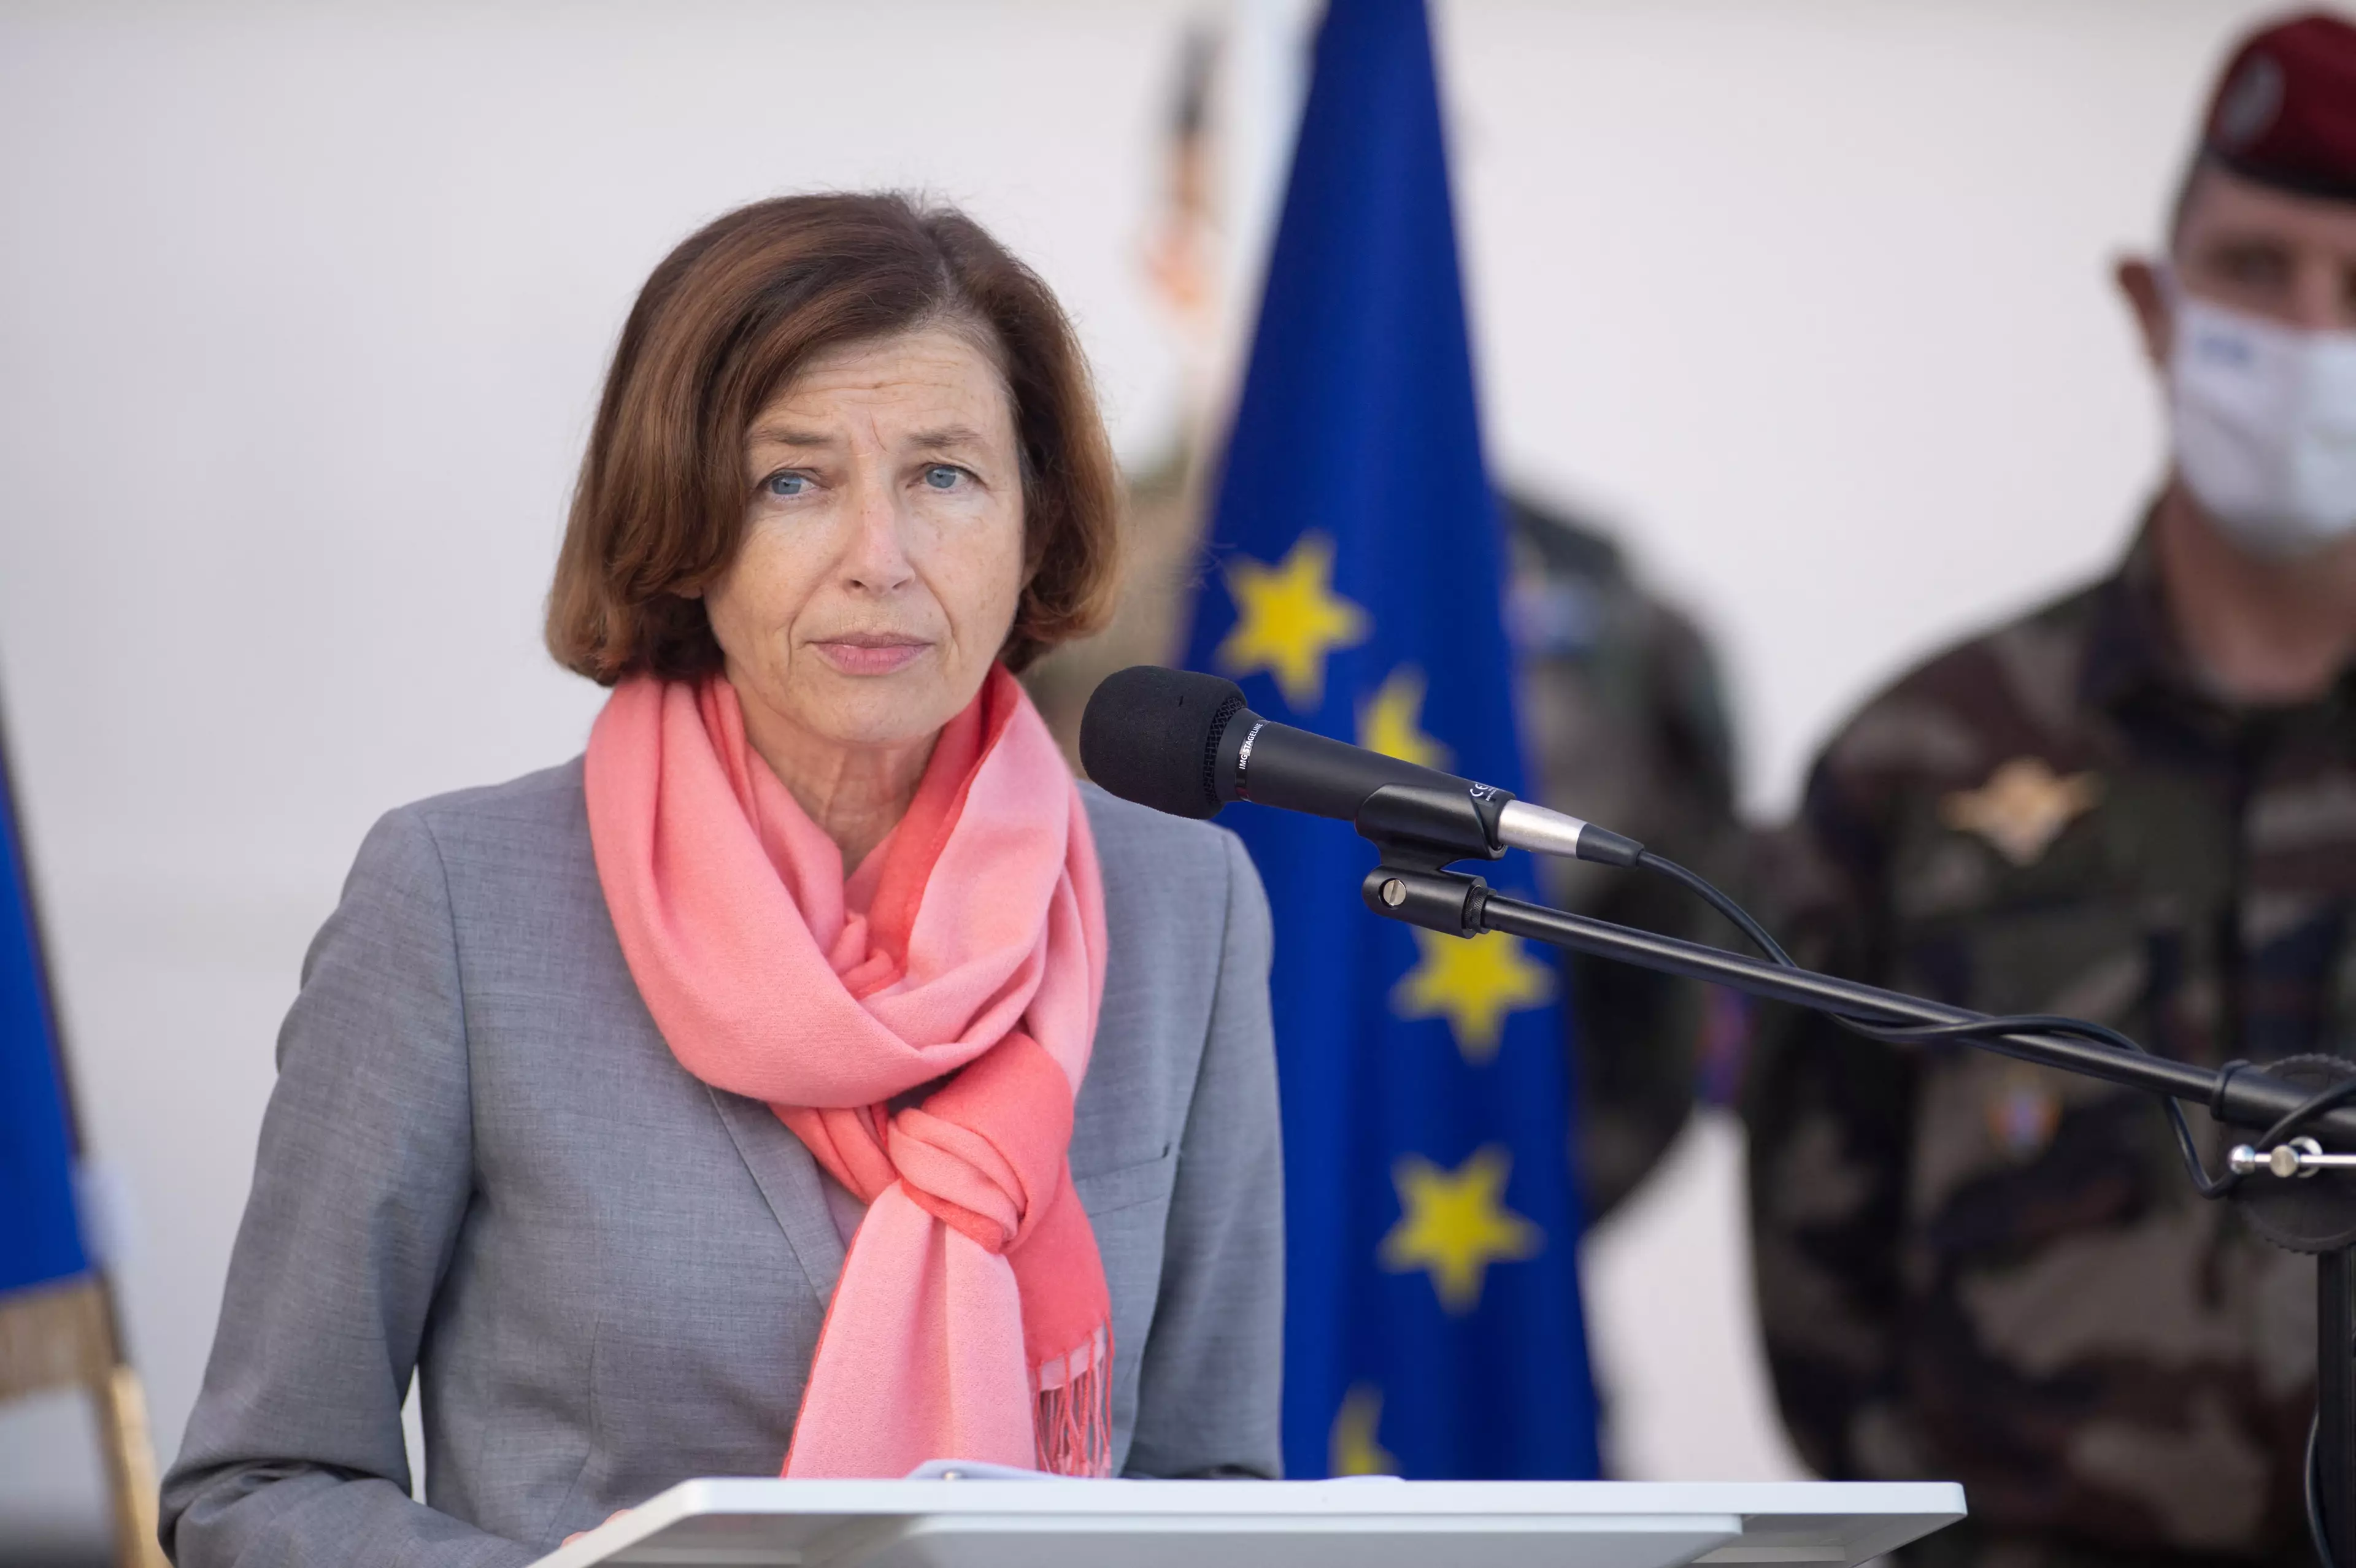 Florence Parly, French minister for the armed forces.